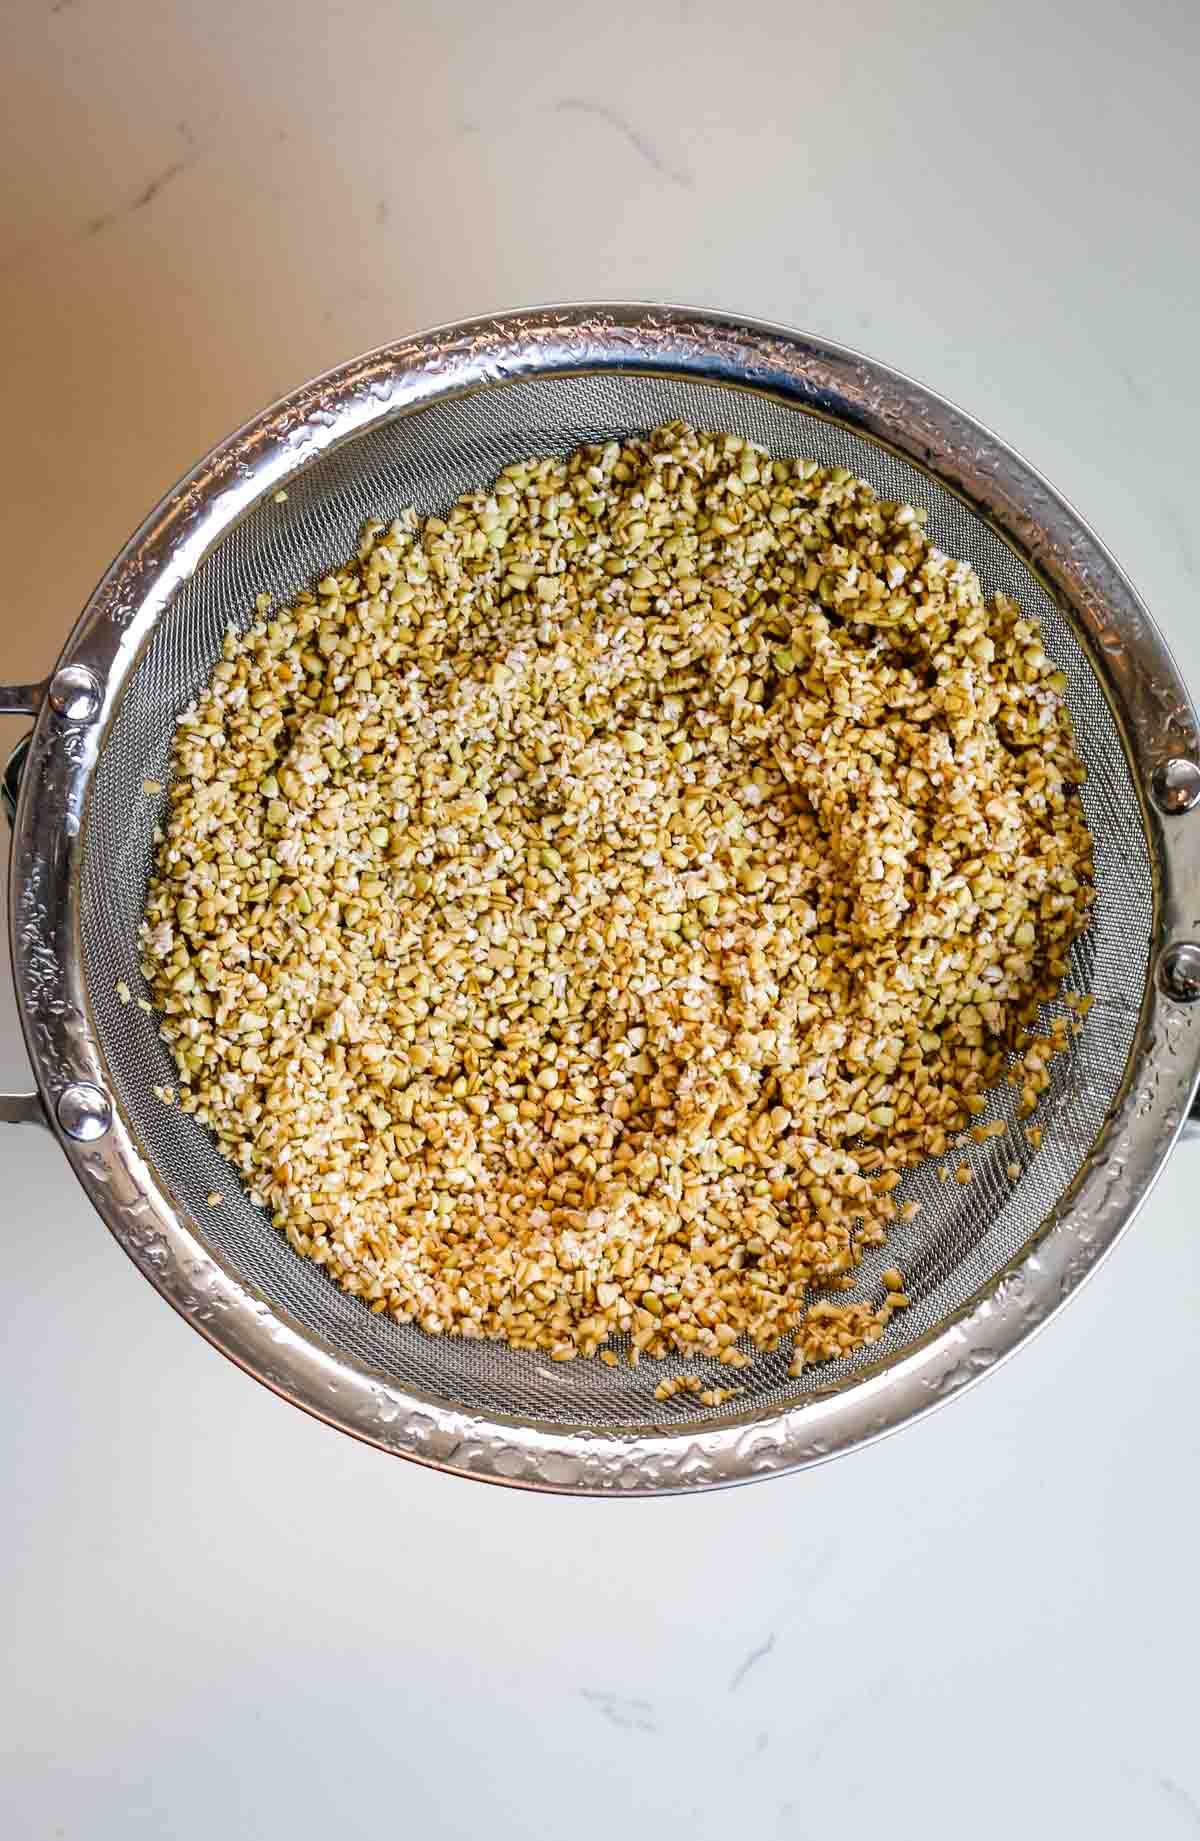 oats and other ingredients in a metal strainer on a white counter